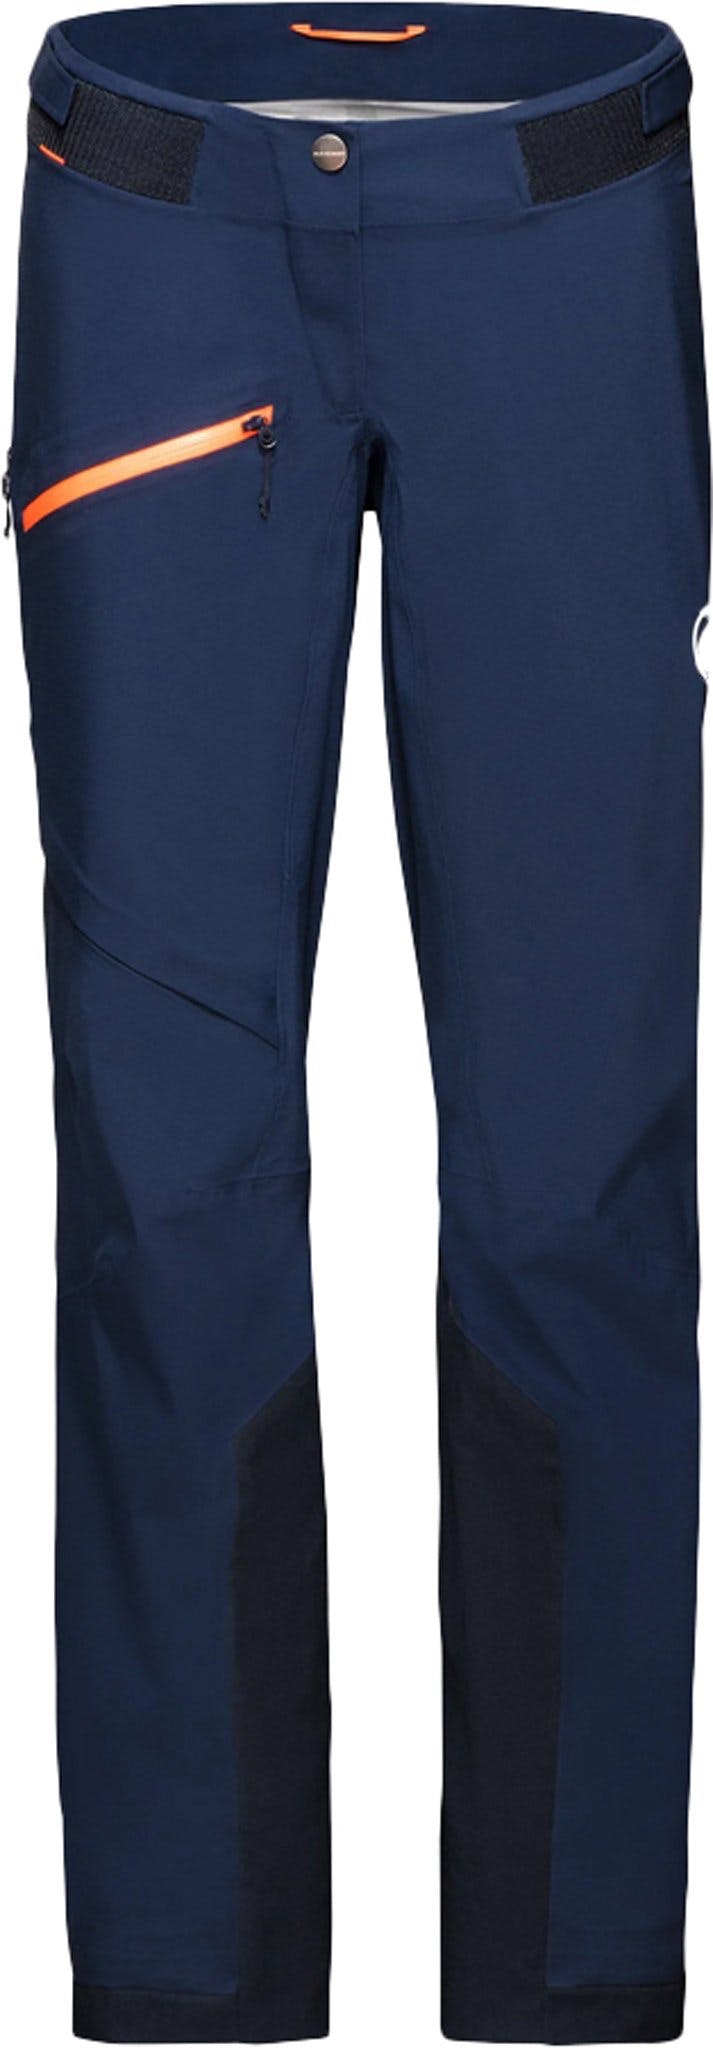 Product image for Aenergy Air Hardshell Pants - Women's